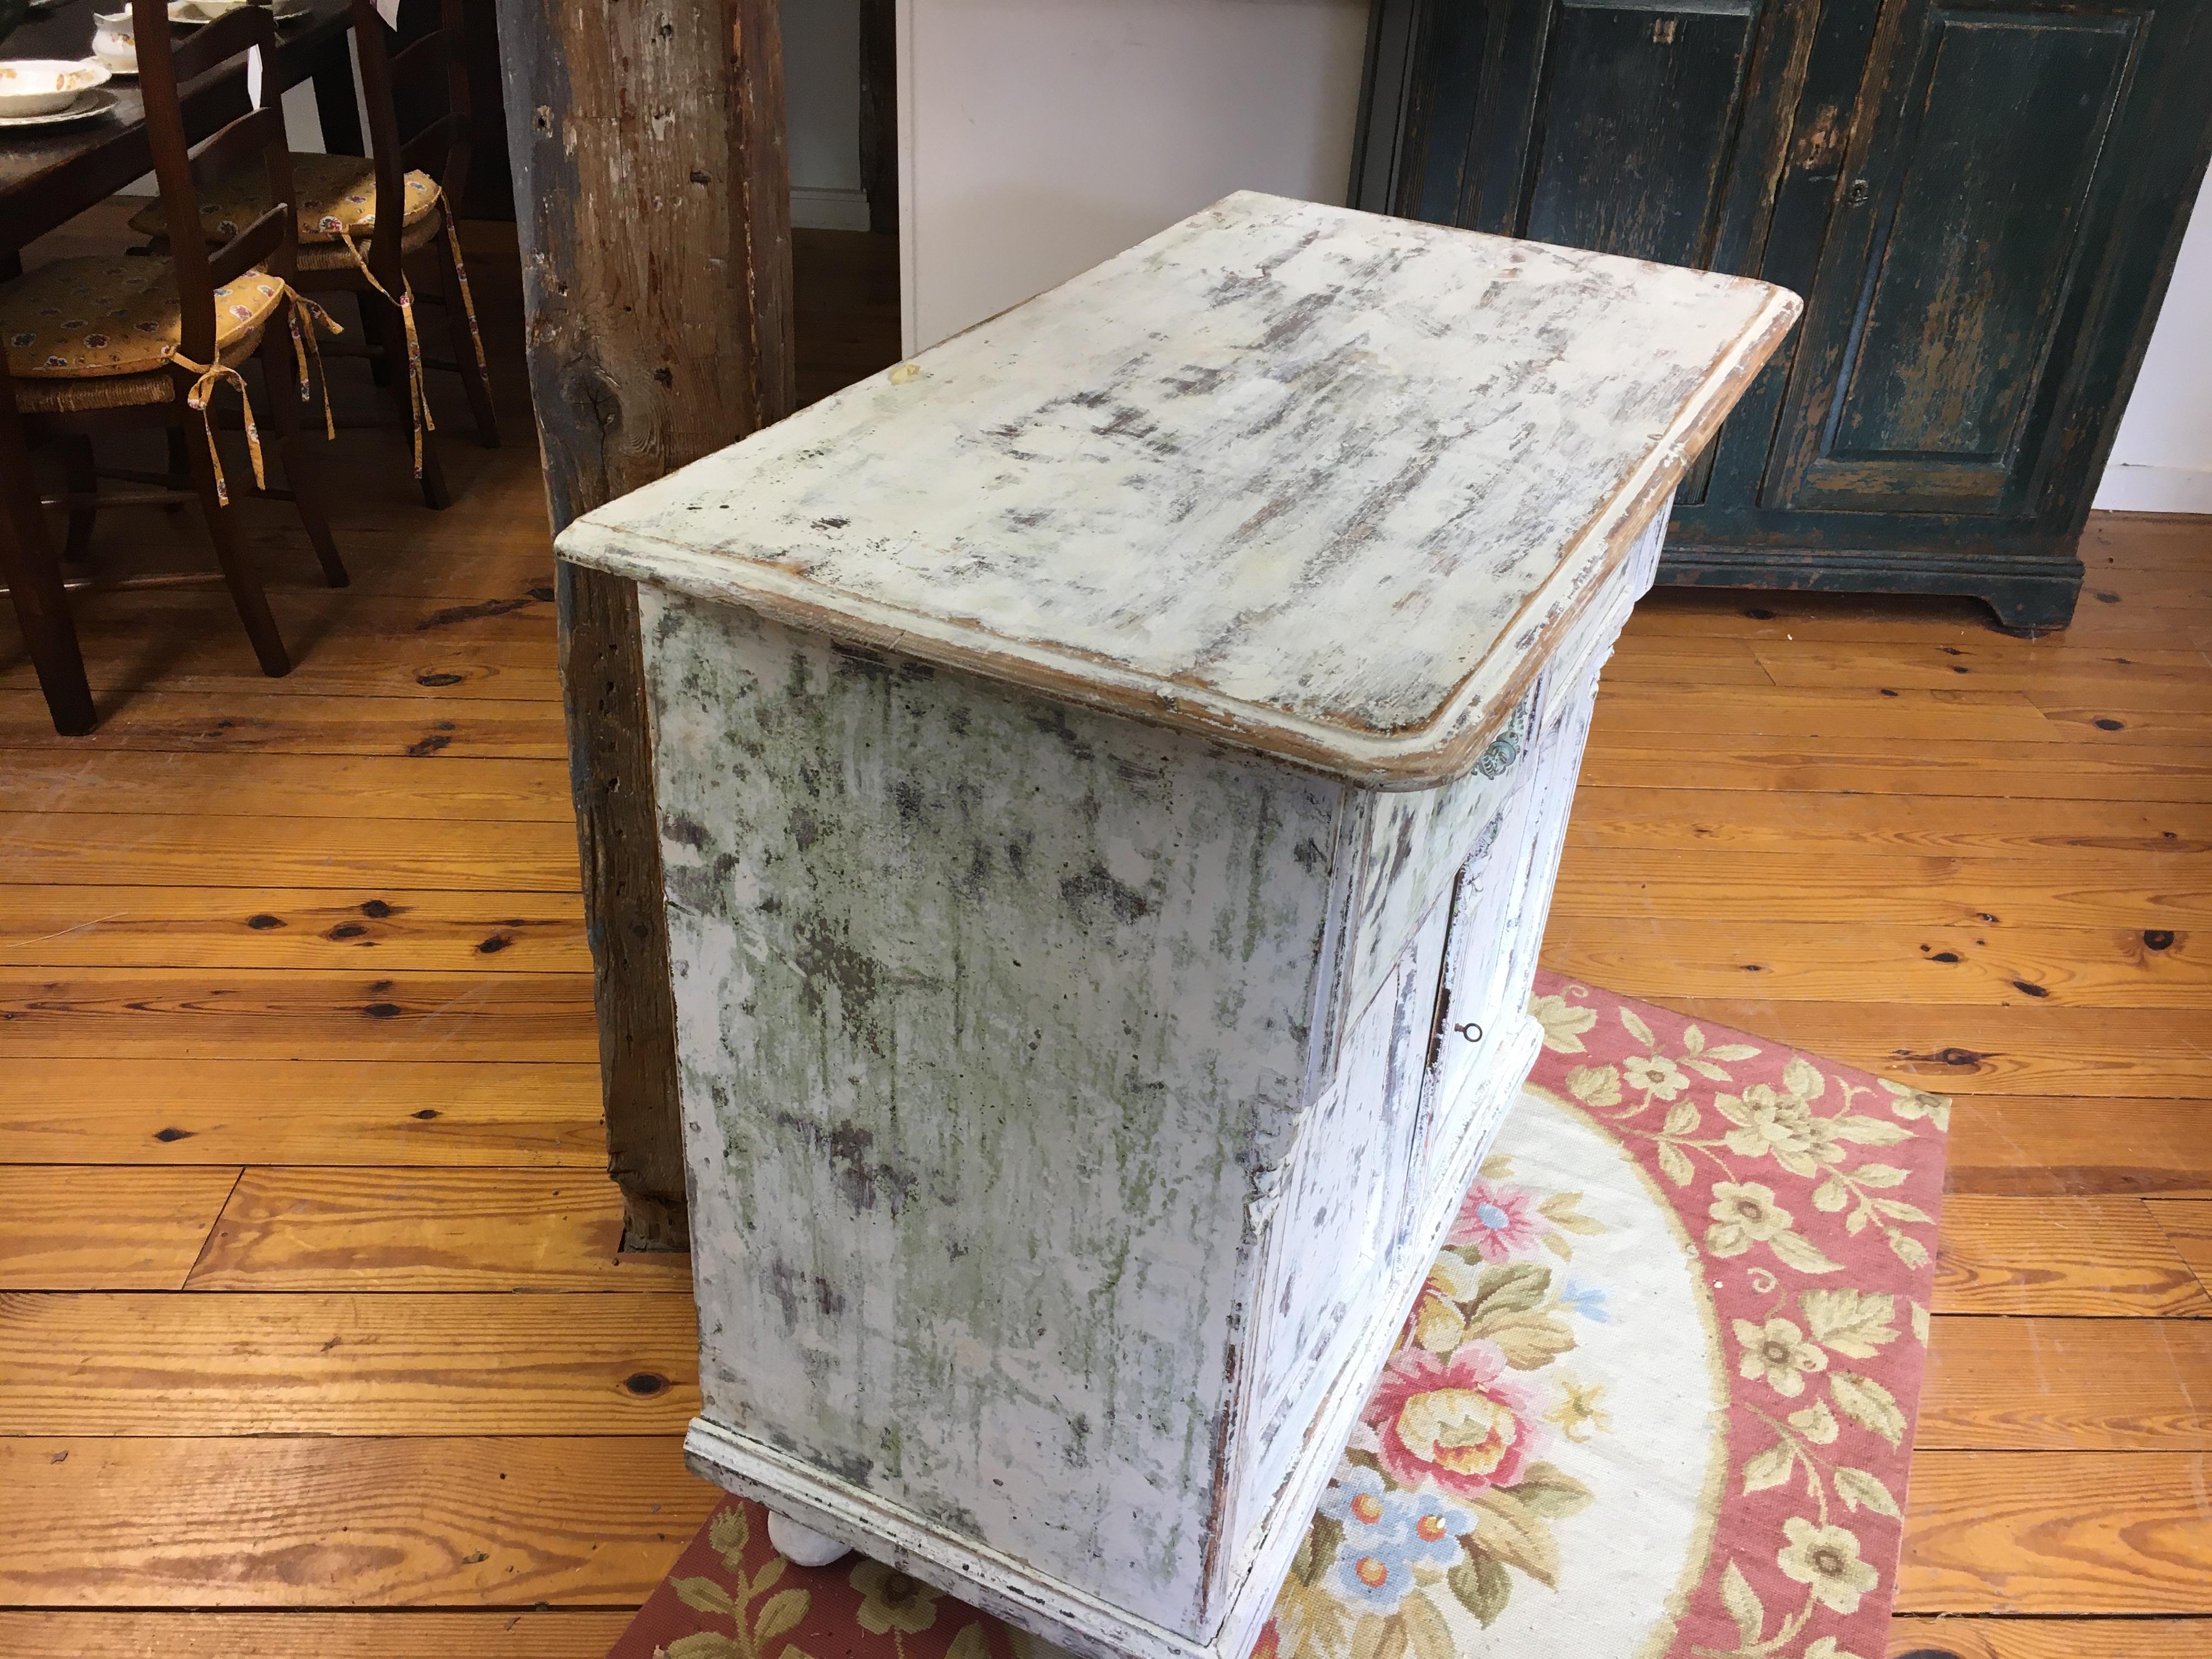 - This is one of the prettiest pieces in our store. The fluting on the sides and middle and beautiful handles for the drawers all make this piece an eye-catching piece of French furniture. The paint is an off-white and the pricing is very fair.